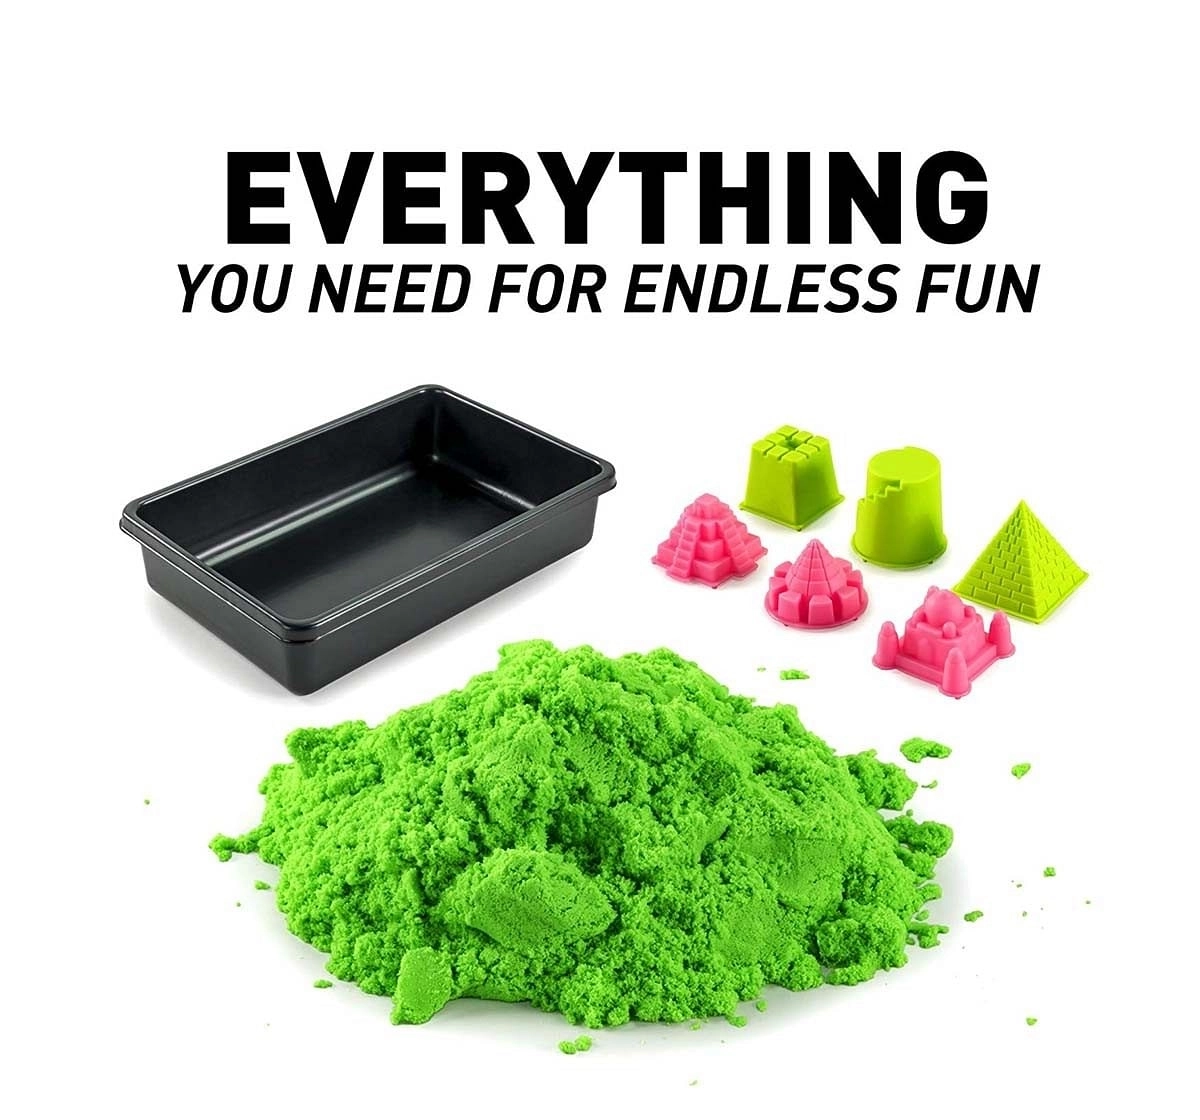 National Geographic Green Play Sand - 2 Lbs Of Sand with Castle Mould and Tray, Slime & Others for Kids age 3Y+ 